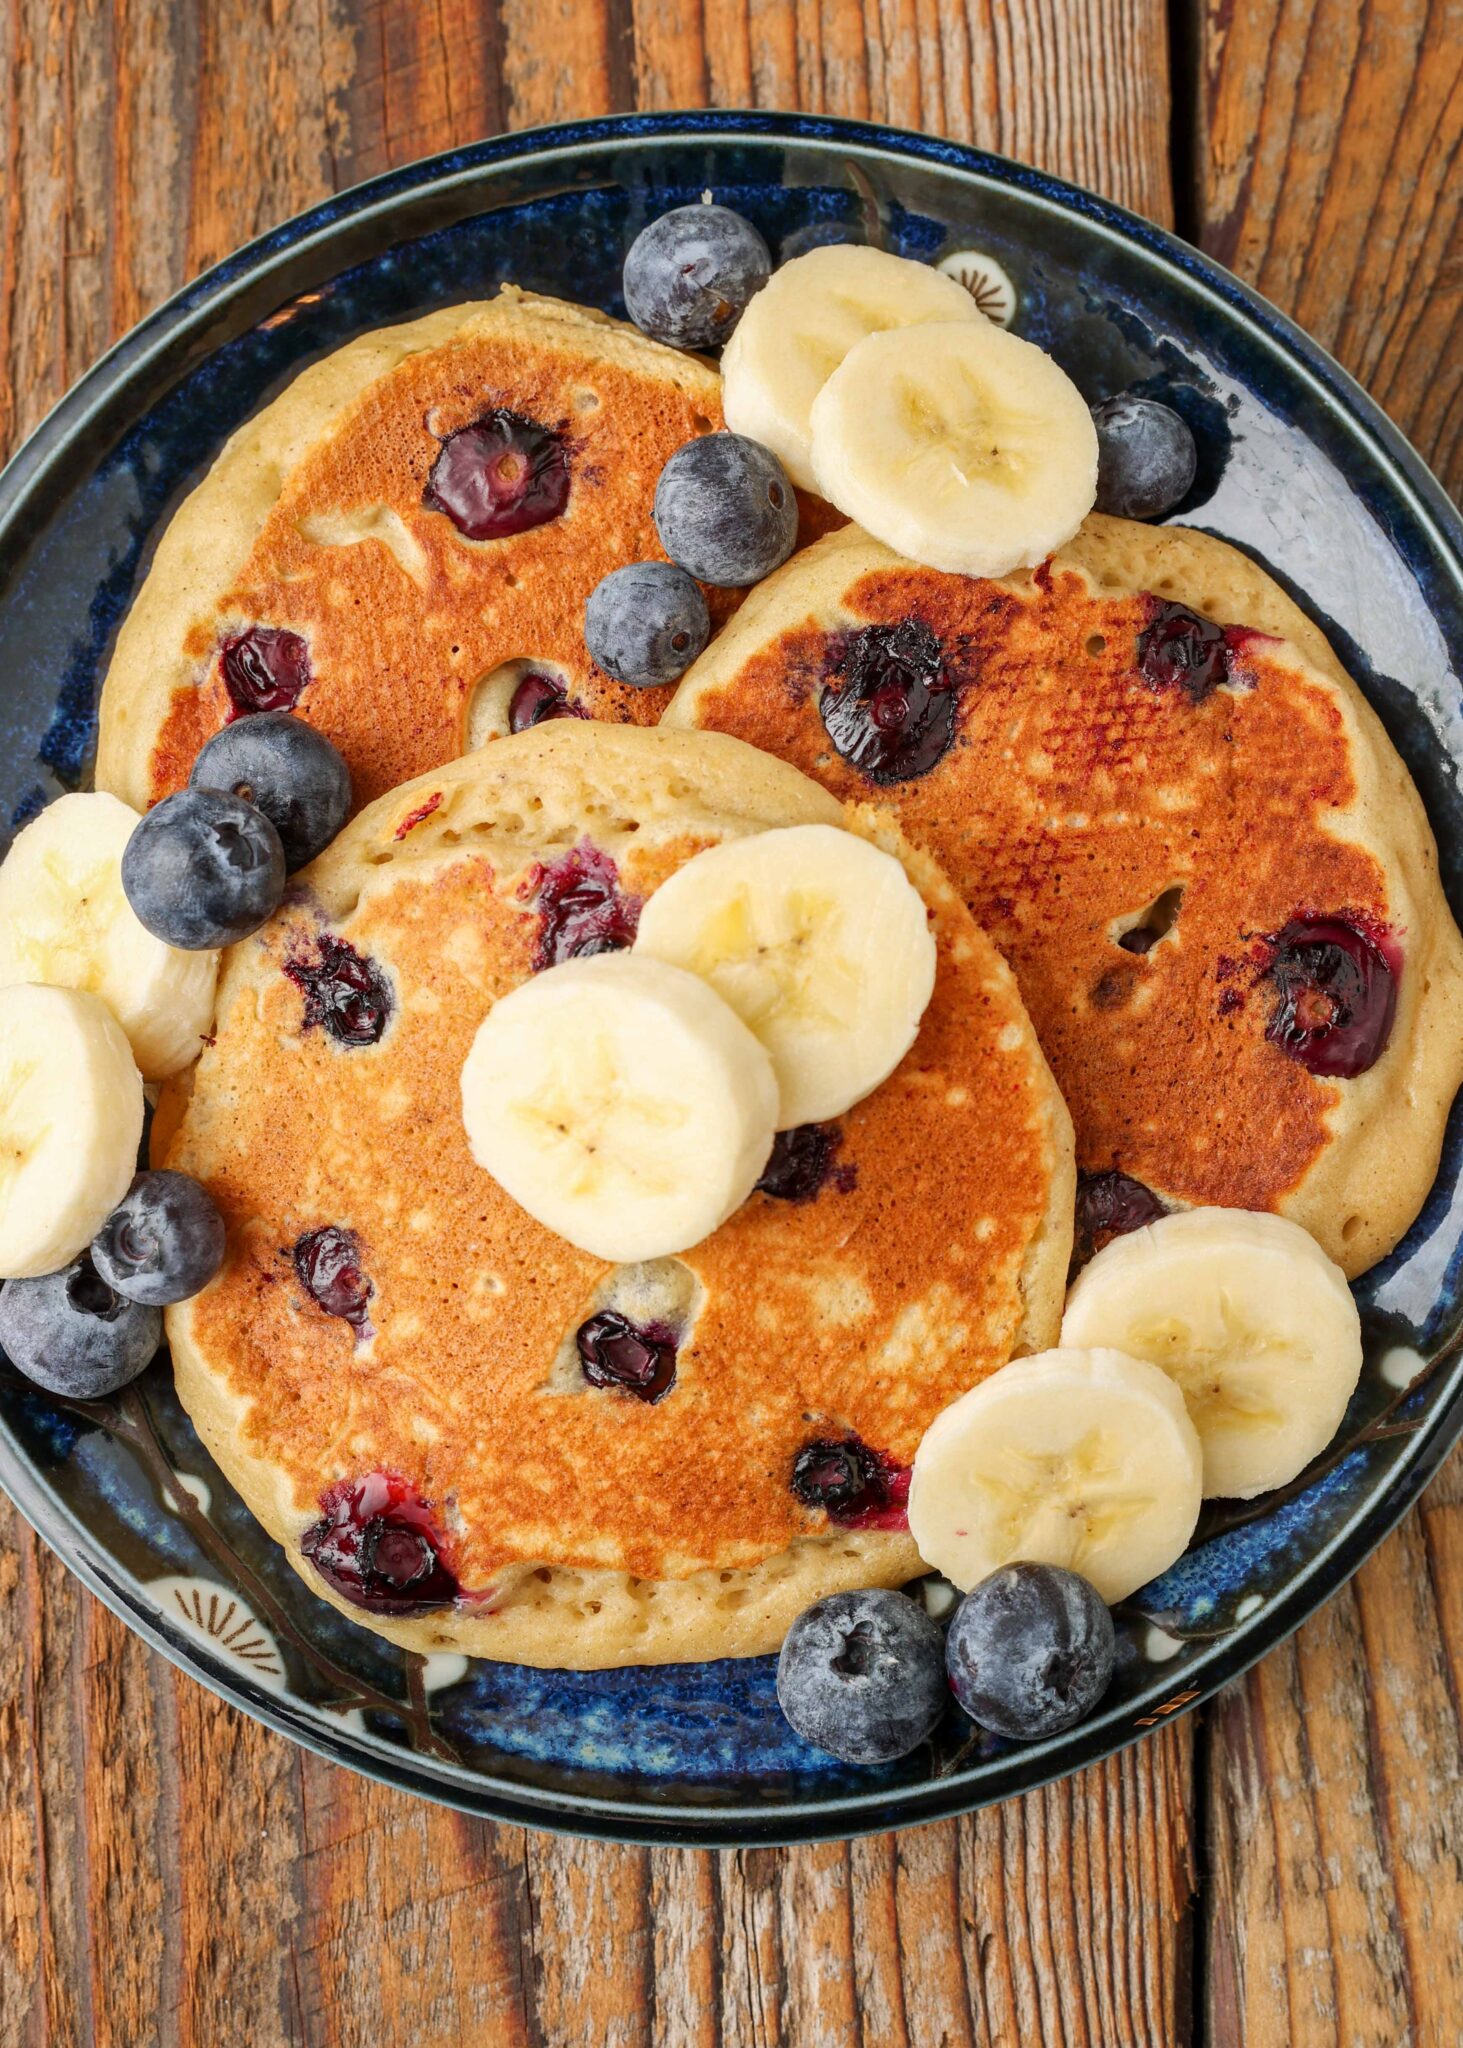 pancakes with sliced bananas and blueberries on plate on wooden table